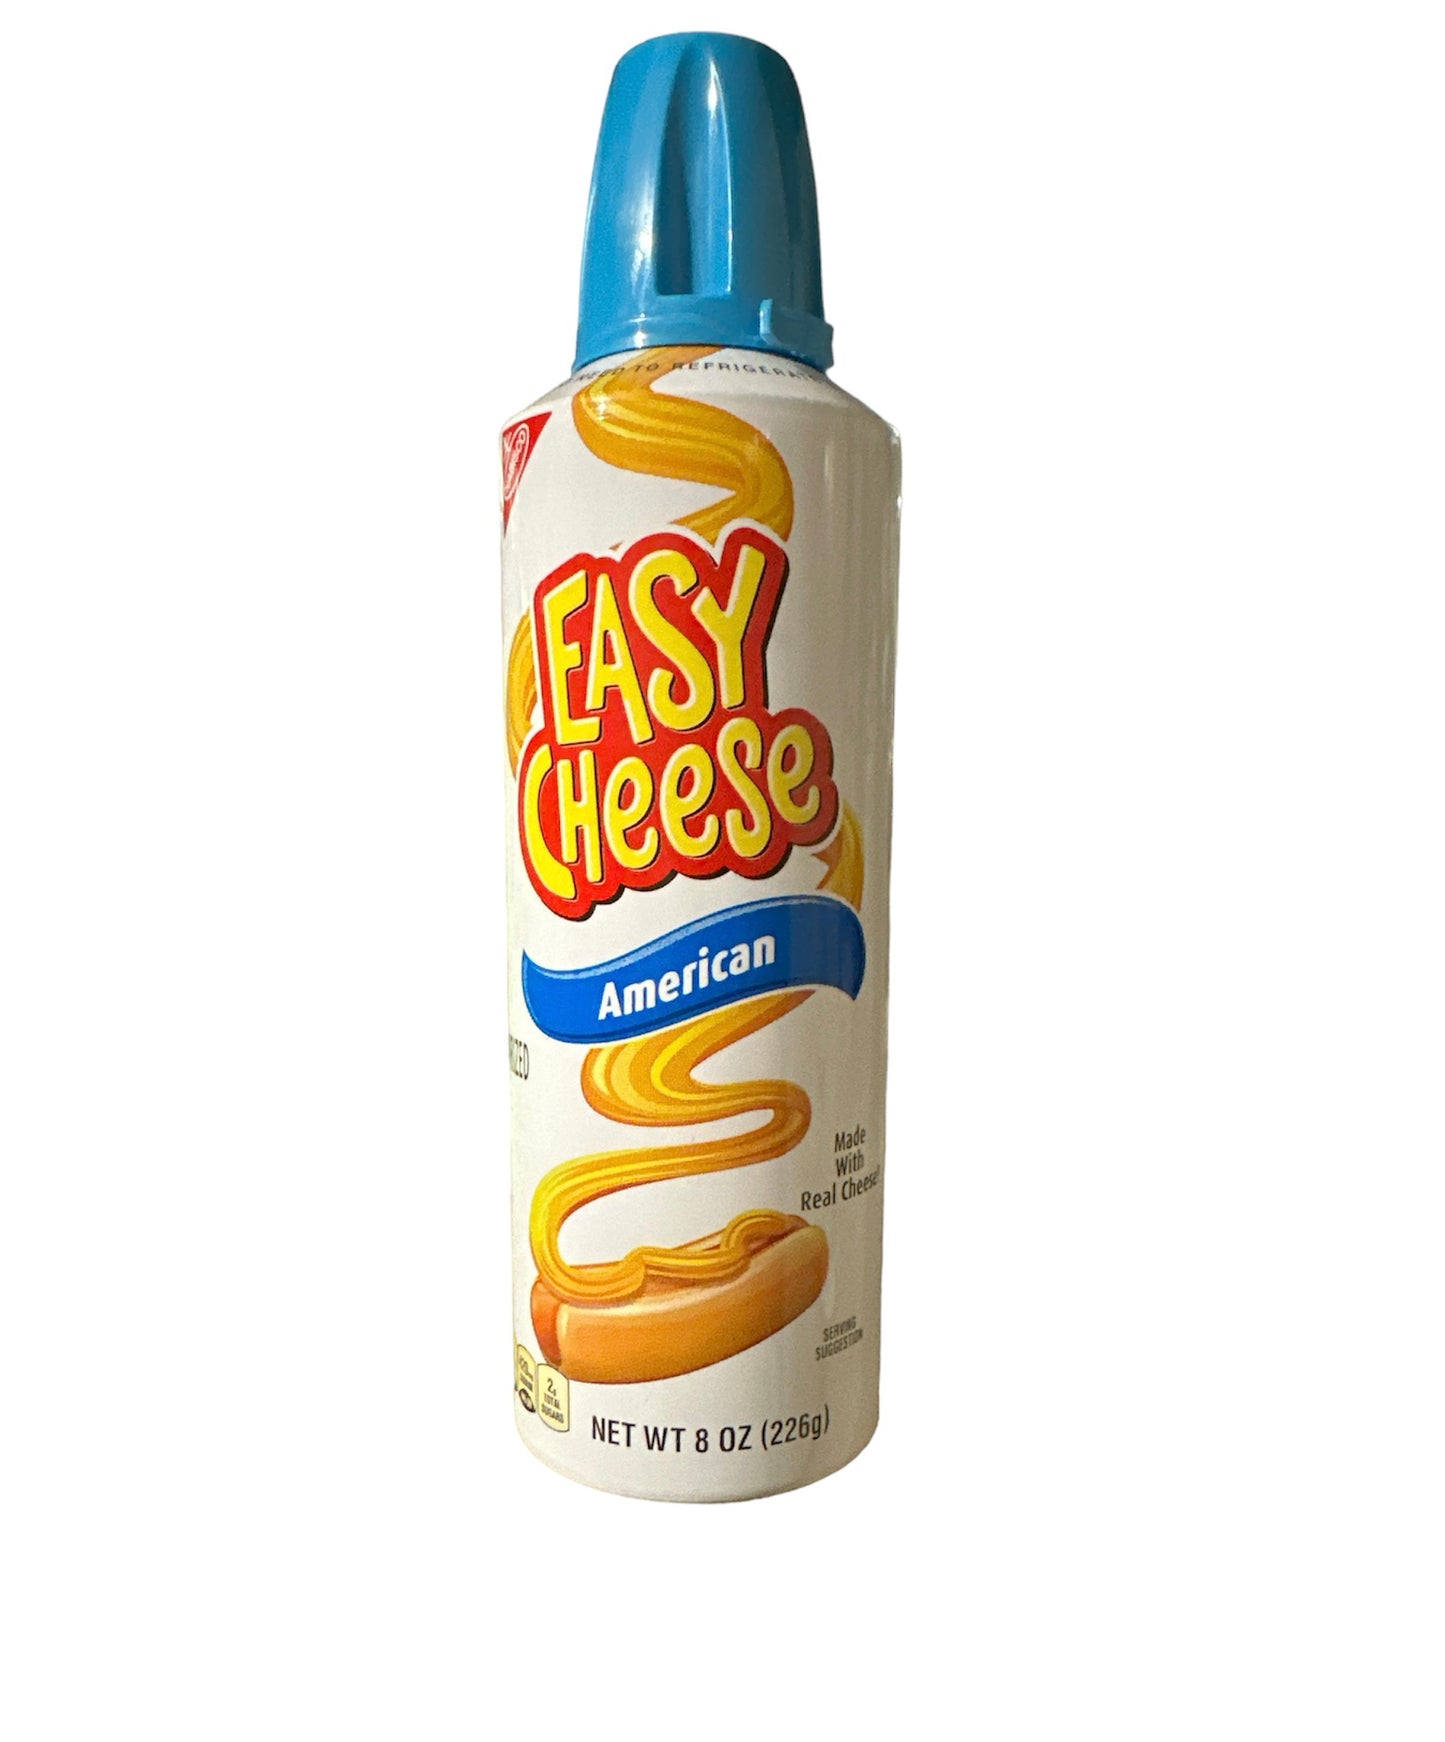 Easy cheese American